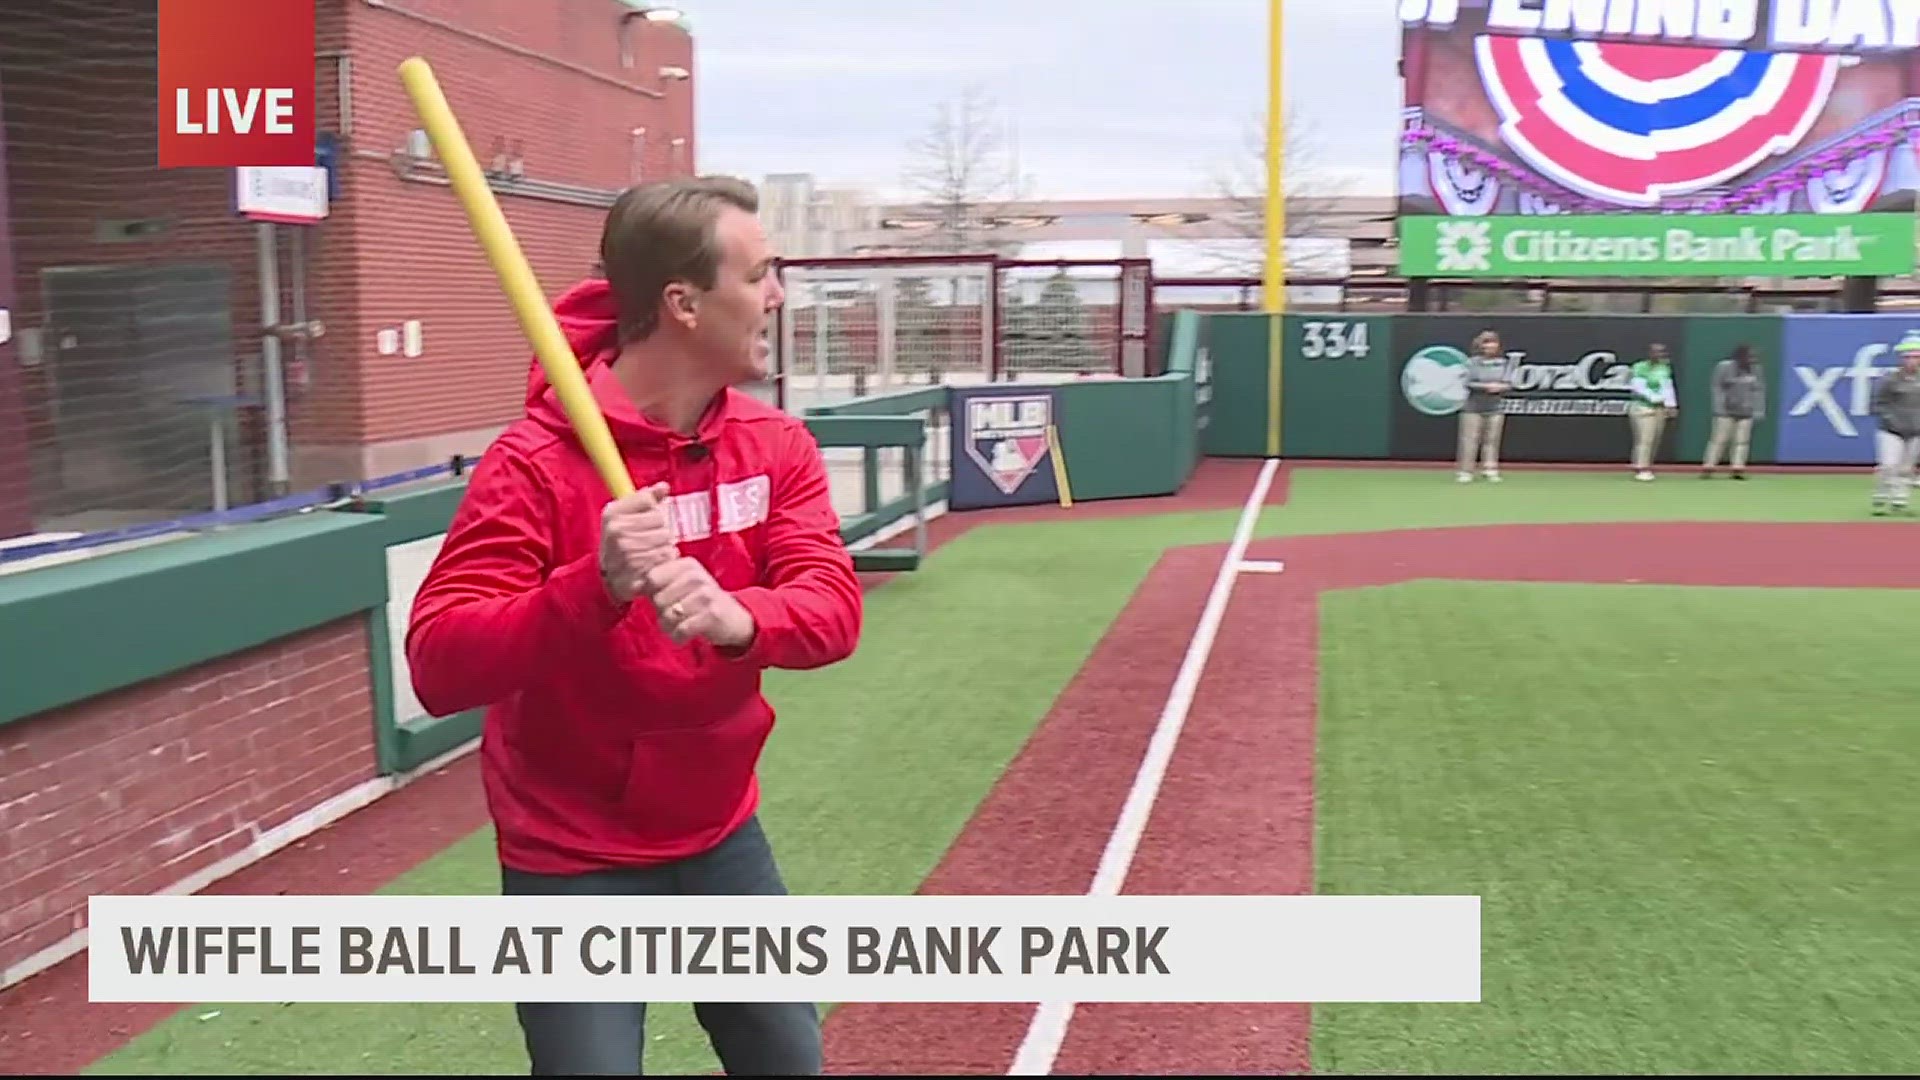 Kids can enjoy the field at Citizens Bank Park while games are being played.